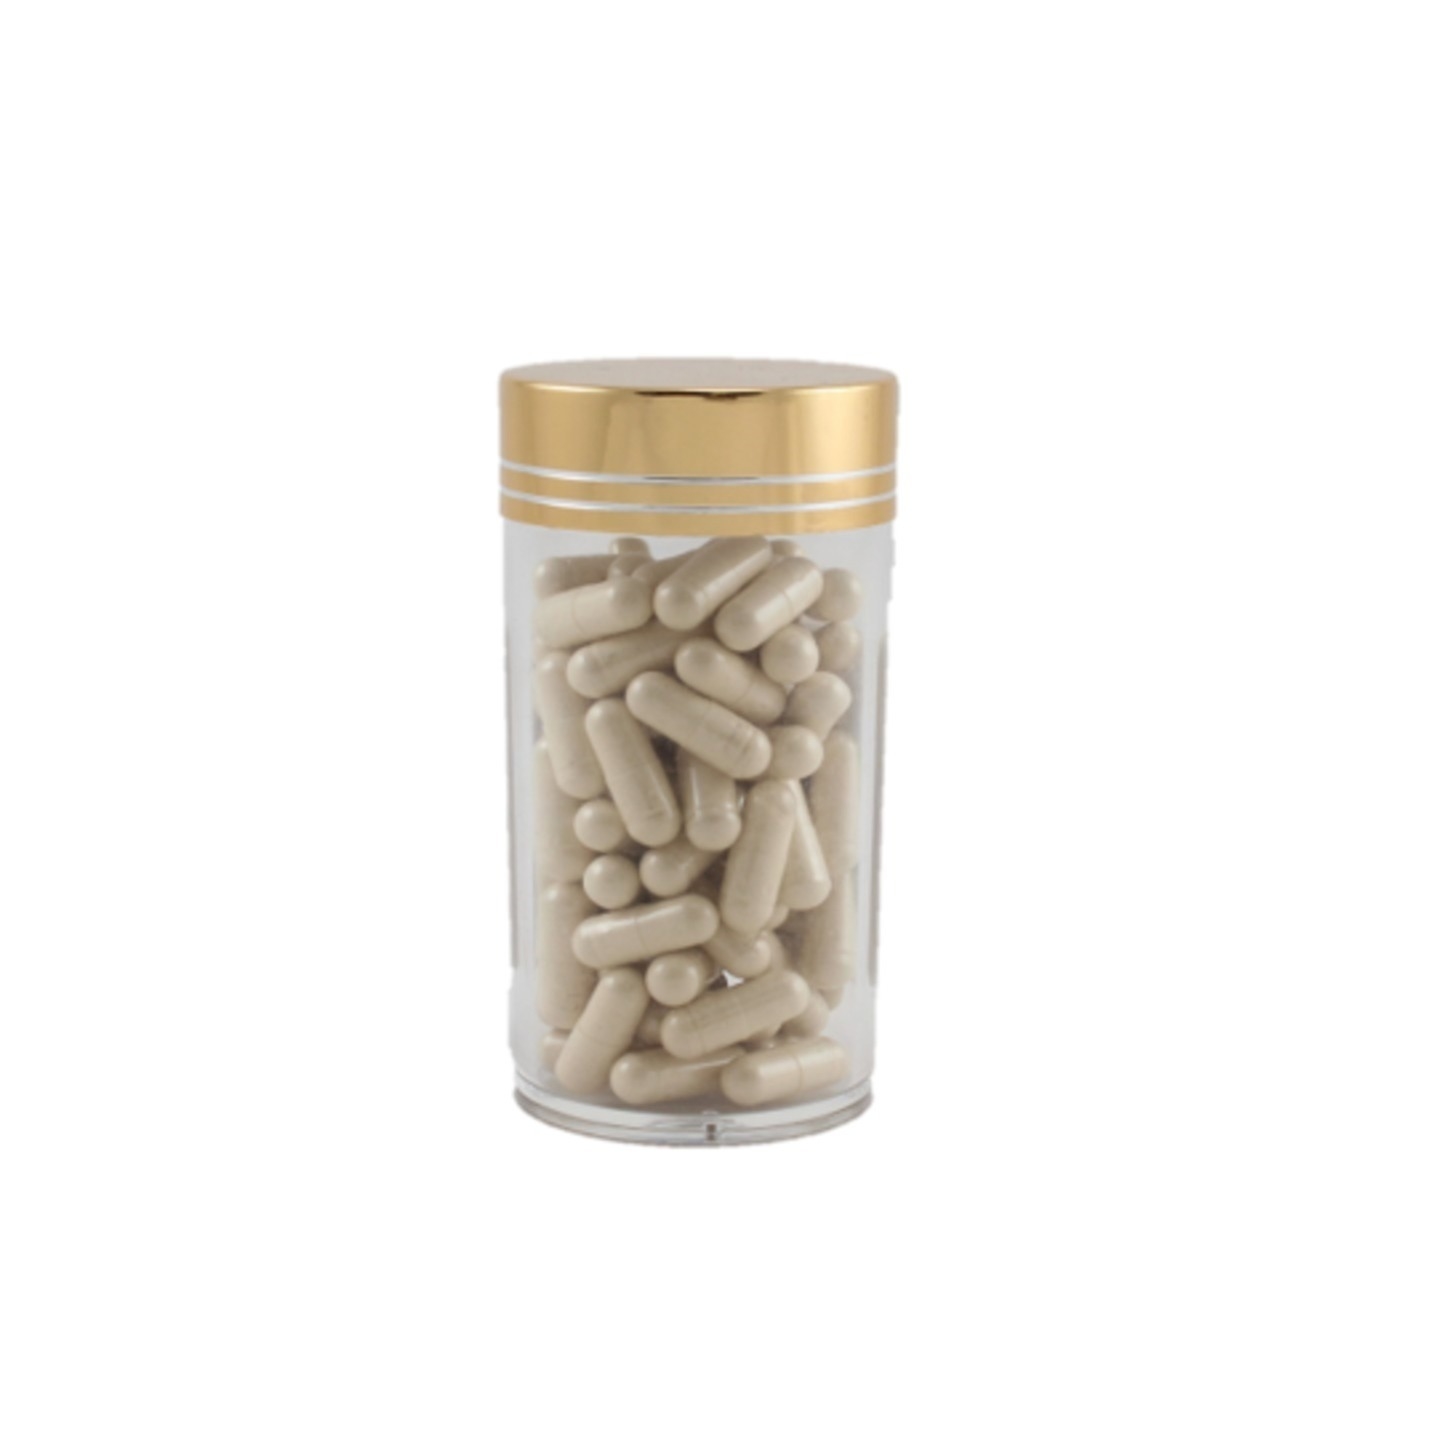 American Ginseng + Panax Notoginseng caps  花旗泡参田七三七胶囊 90s PROMOTION FOR 2